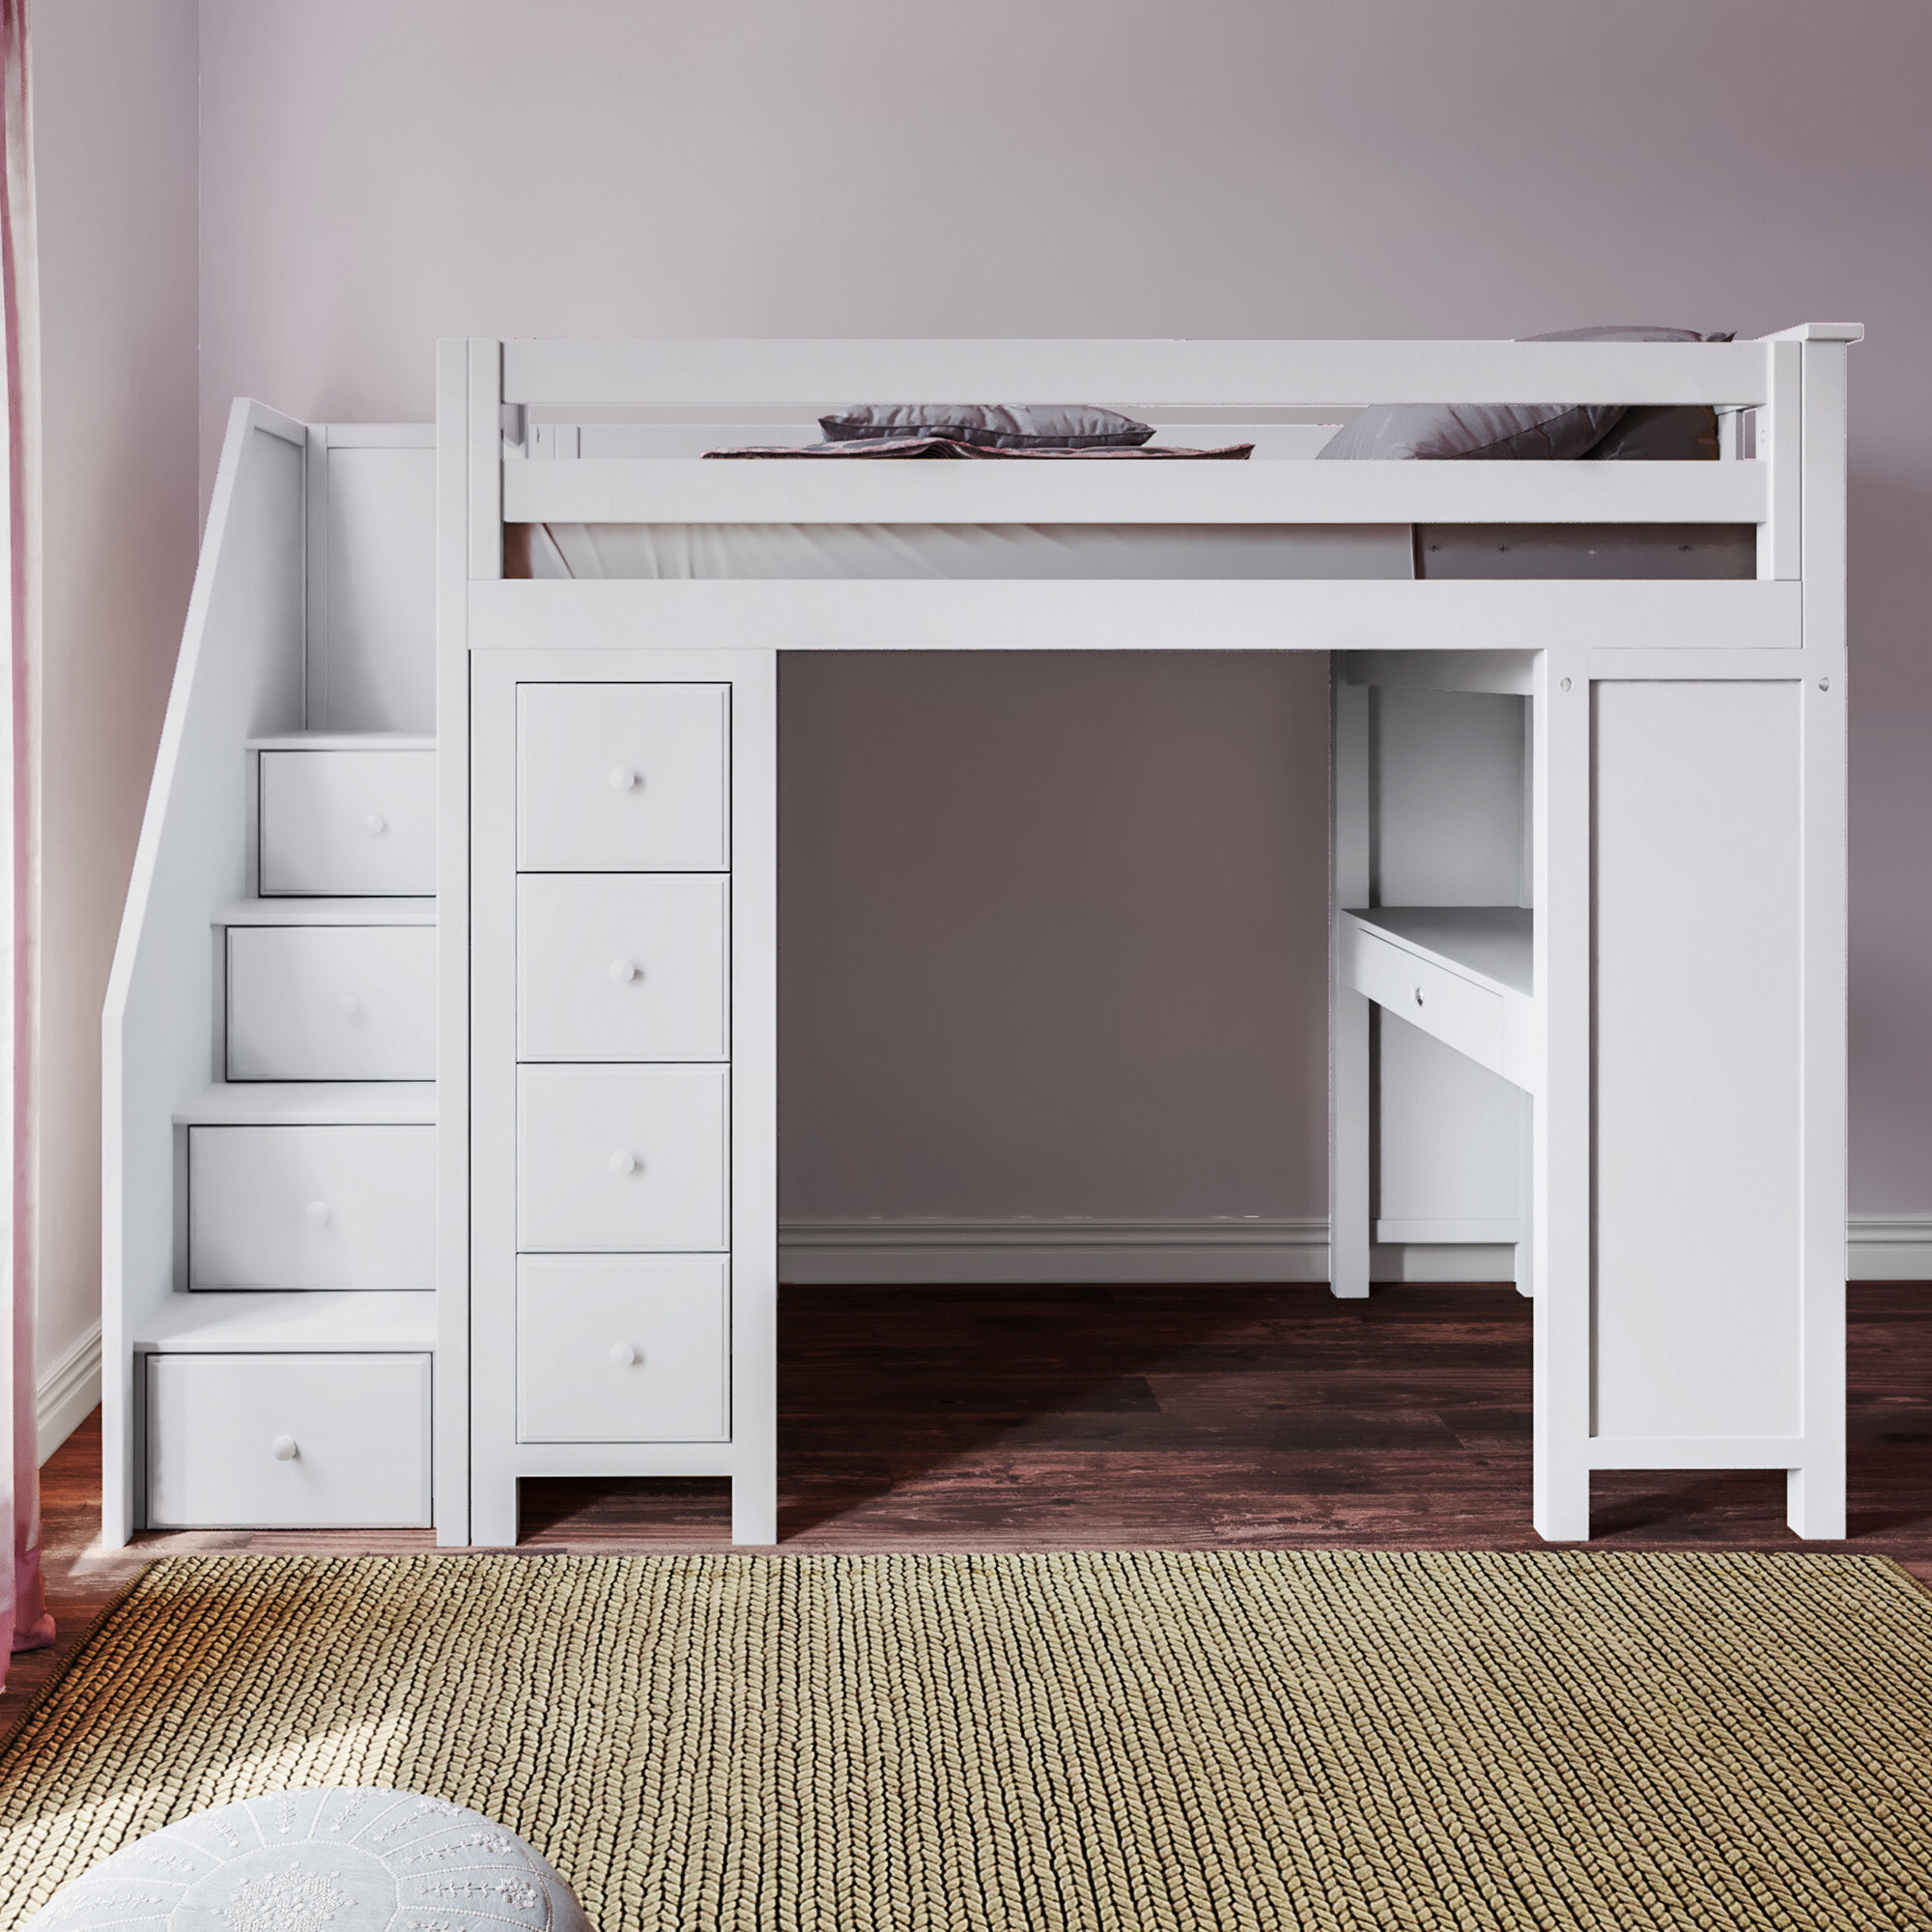 twin bed with desk attached